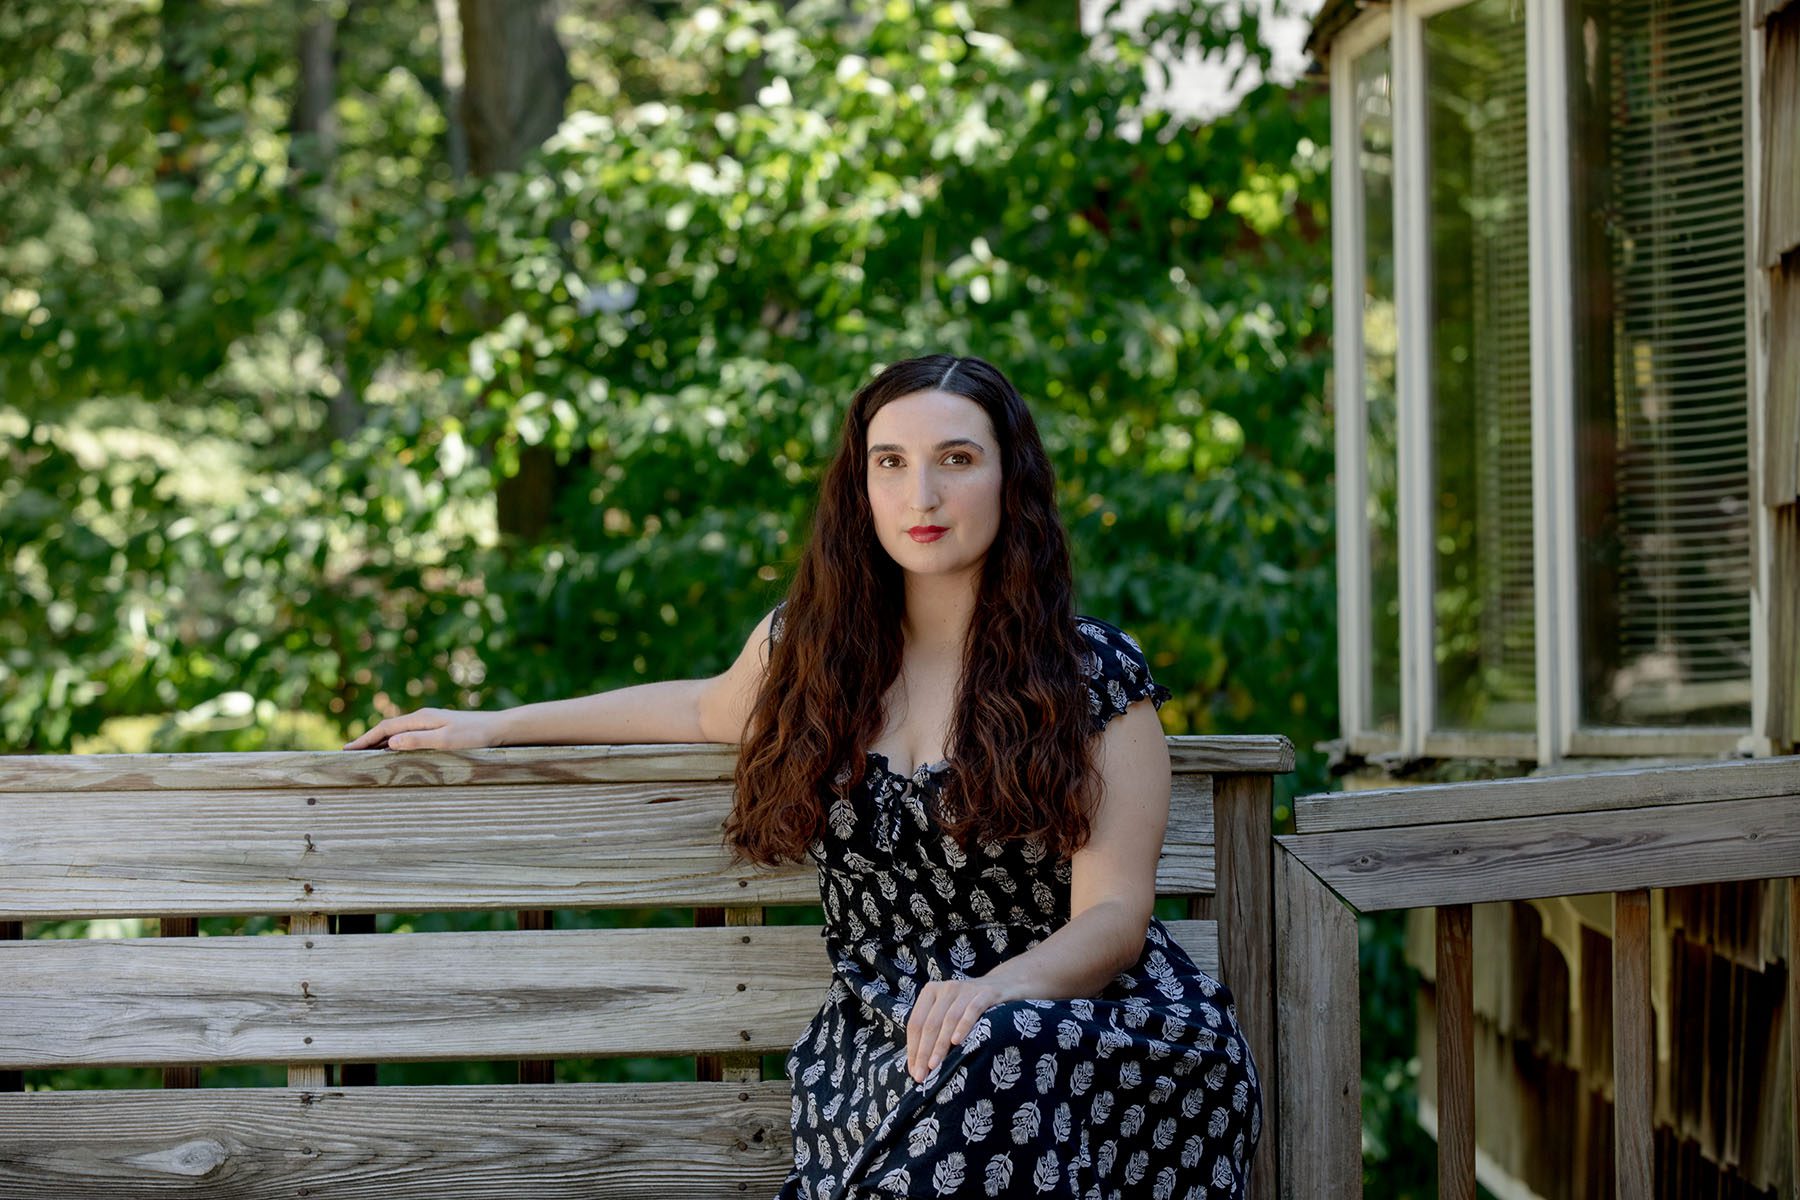 Sarah Anne Mass poses for a portrait while sitting on an old wooden bench on a deck.